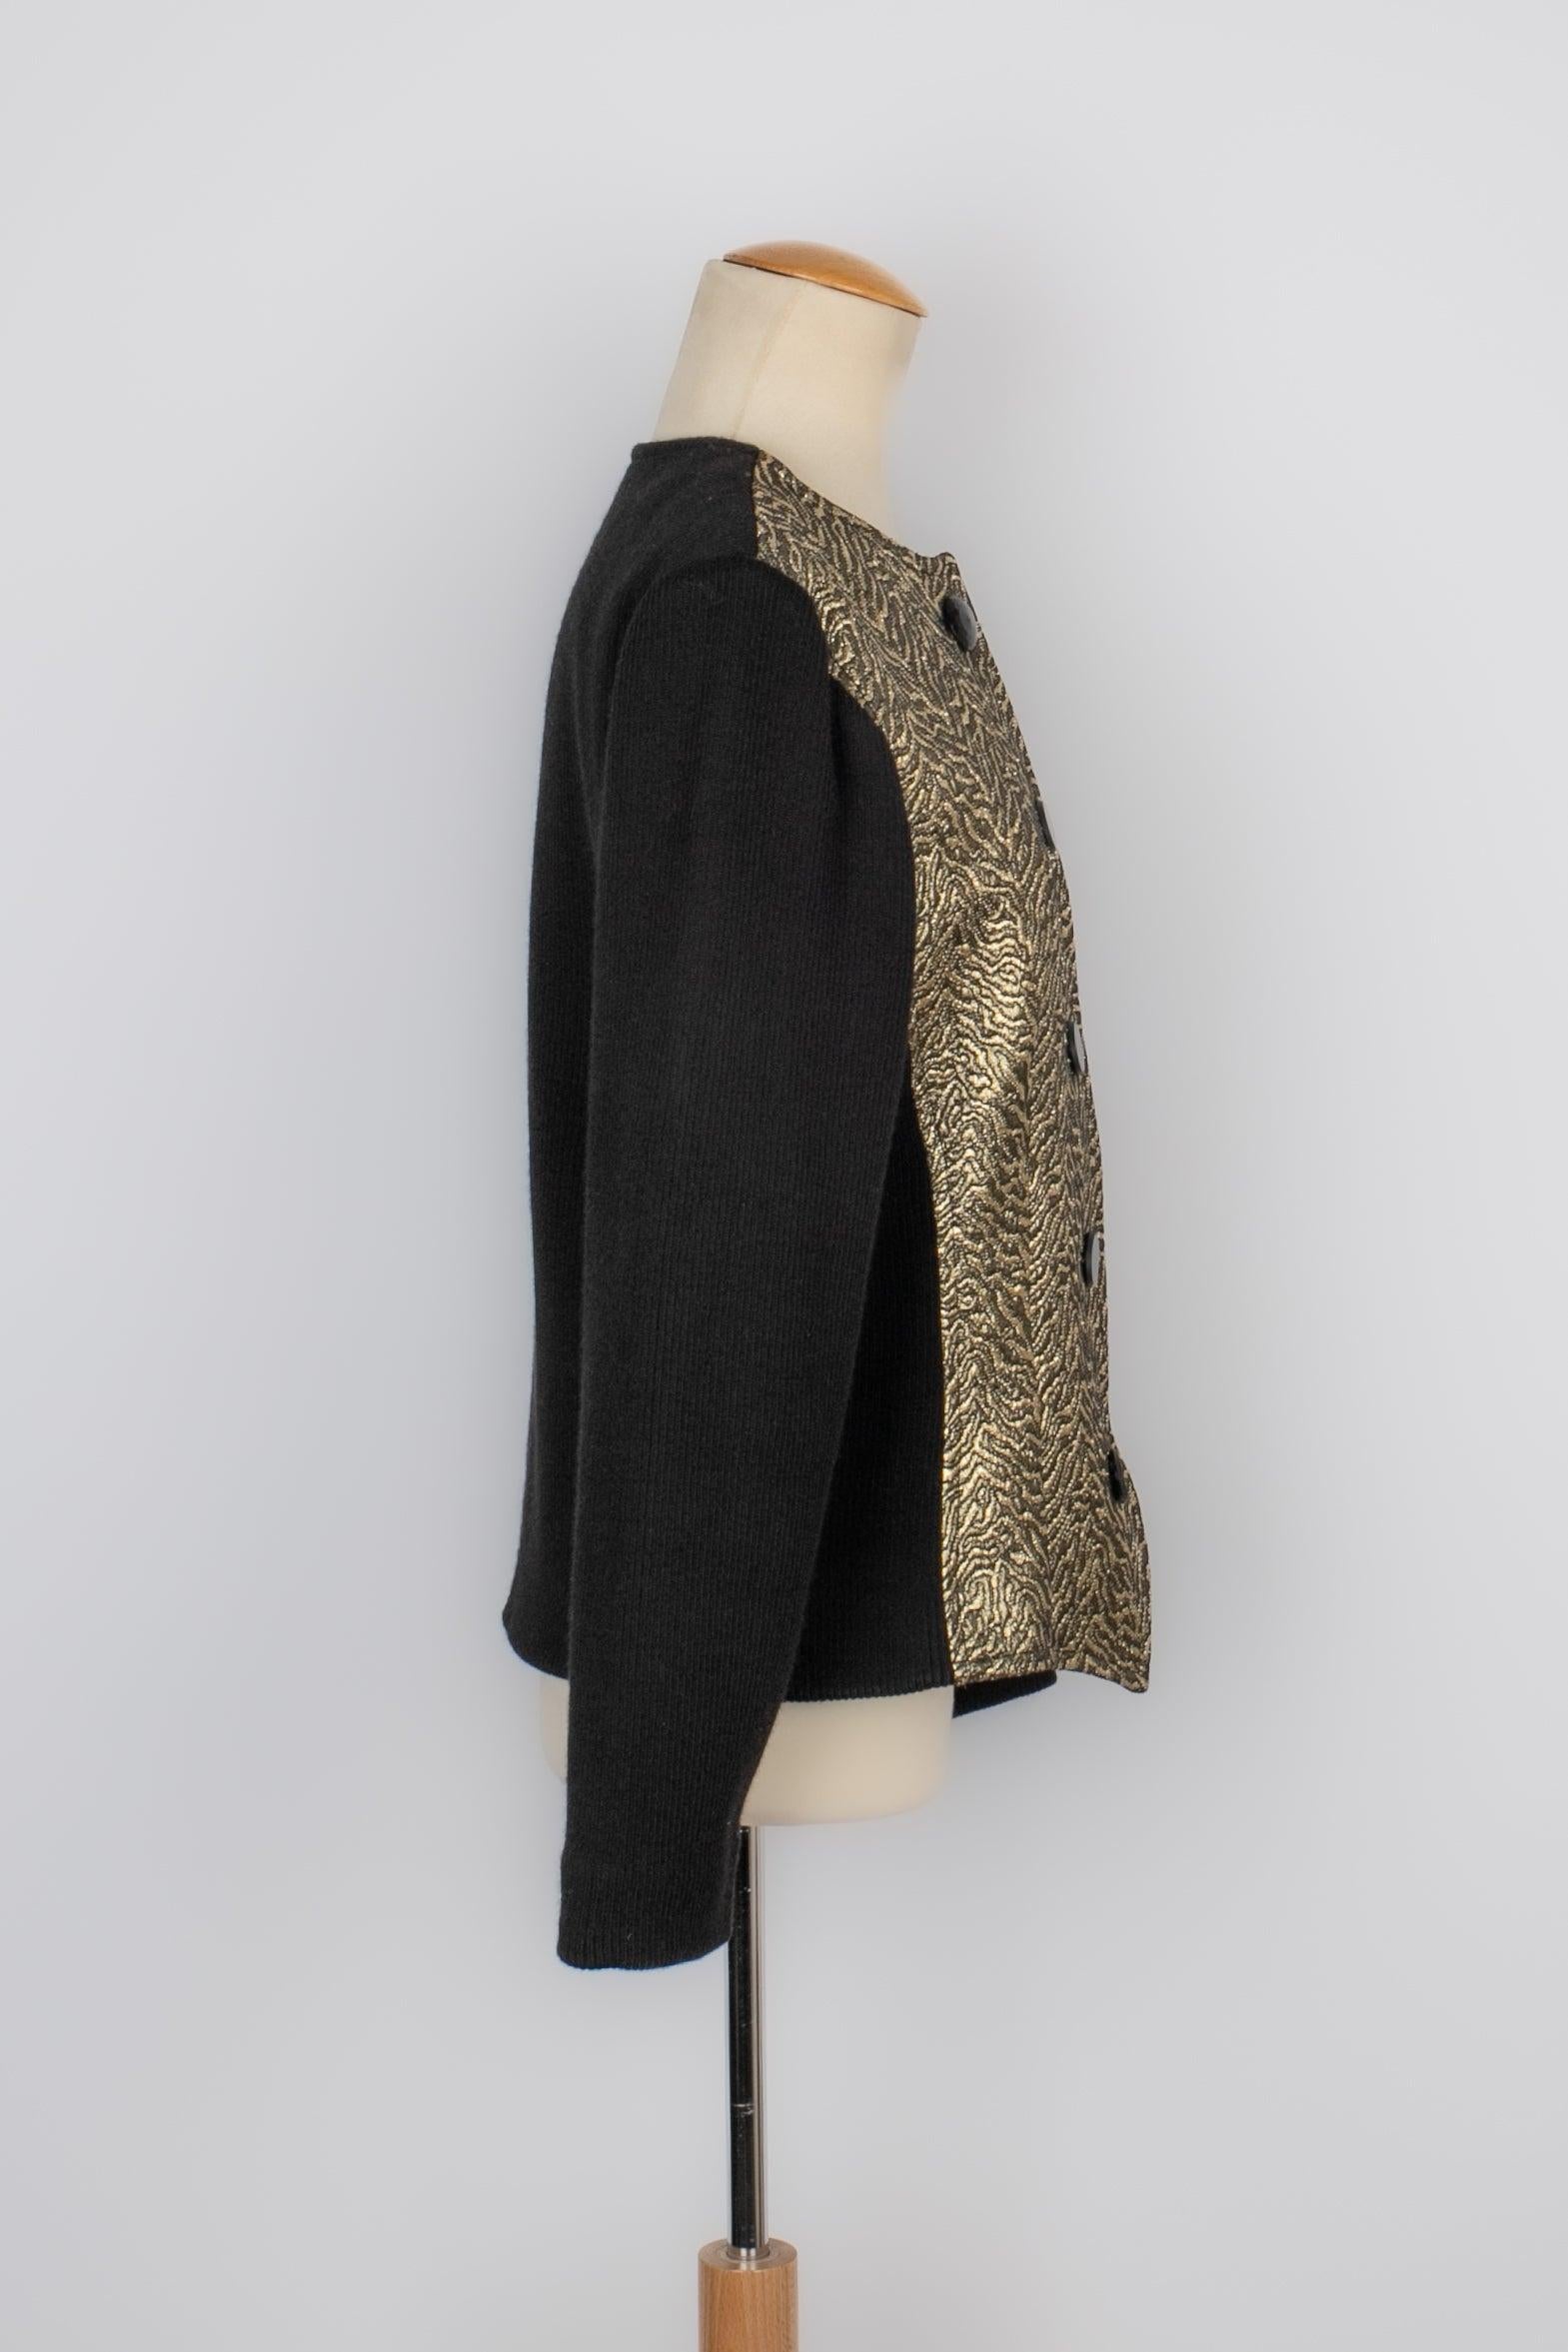 Yves Saint Laurent - (Made in France) Black wool and gold lurex jacket dating from the 1980s. Size and composition label missing, it is suitable for a 38FR. Fall-Winter 1986 collection.

Additional information:
Condition: Very good